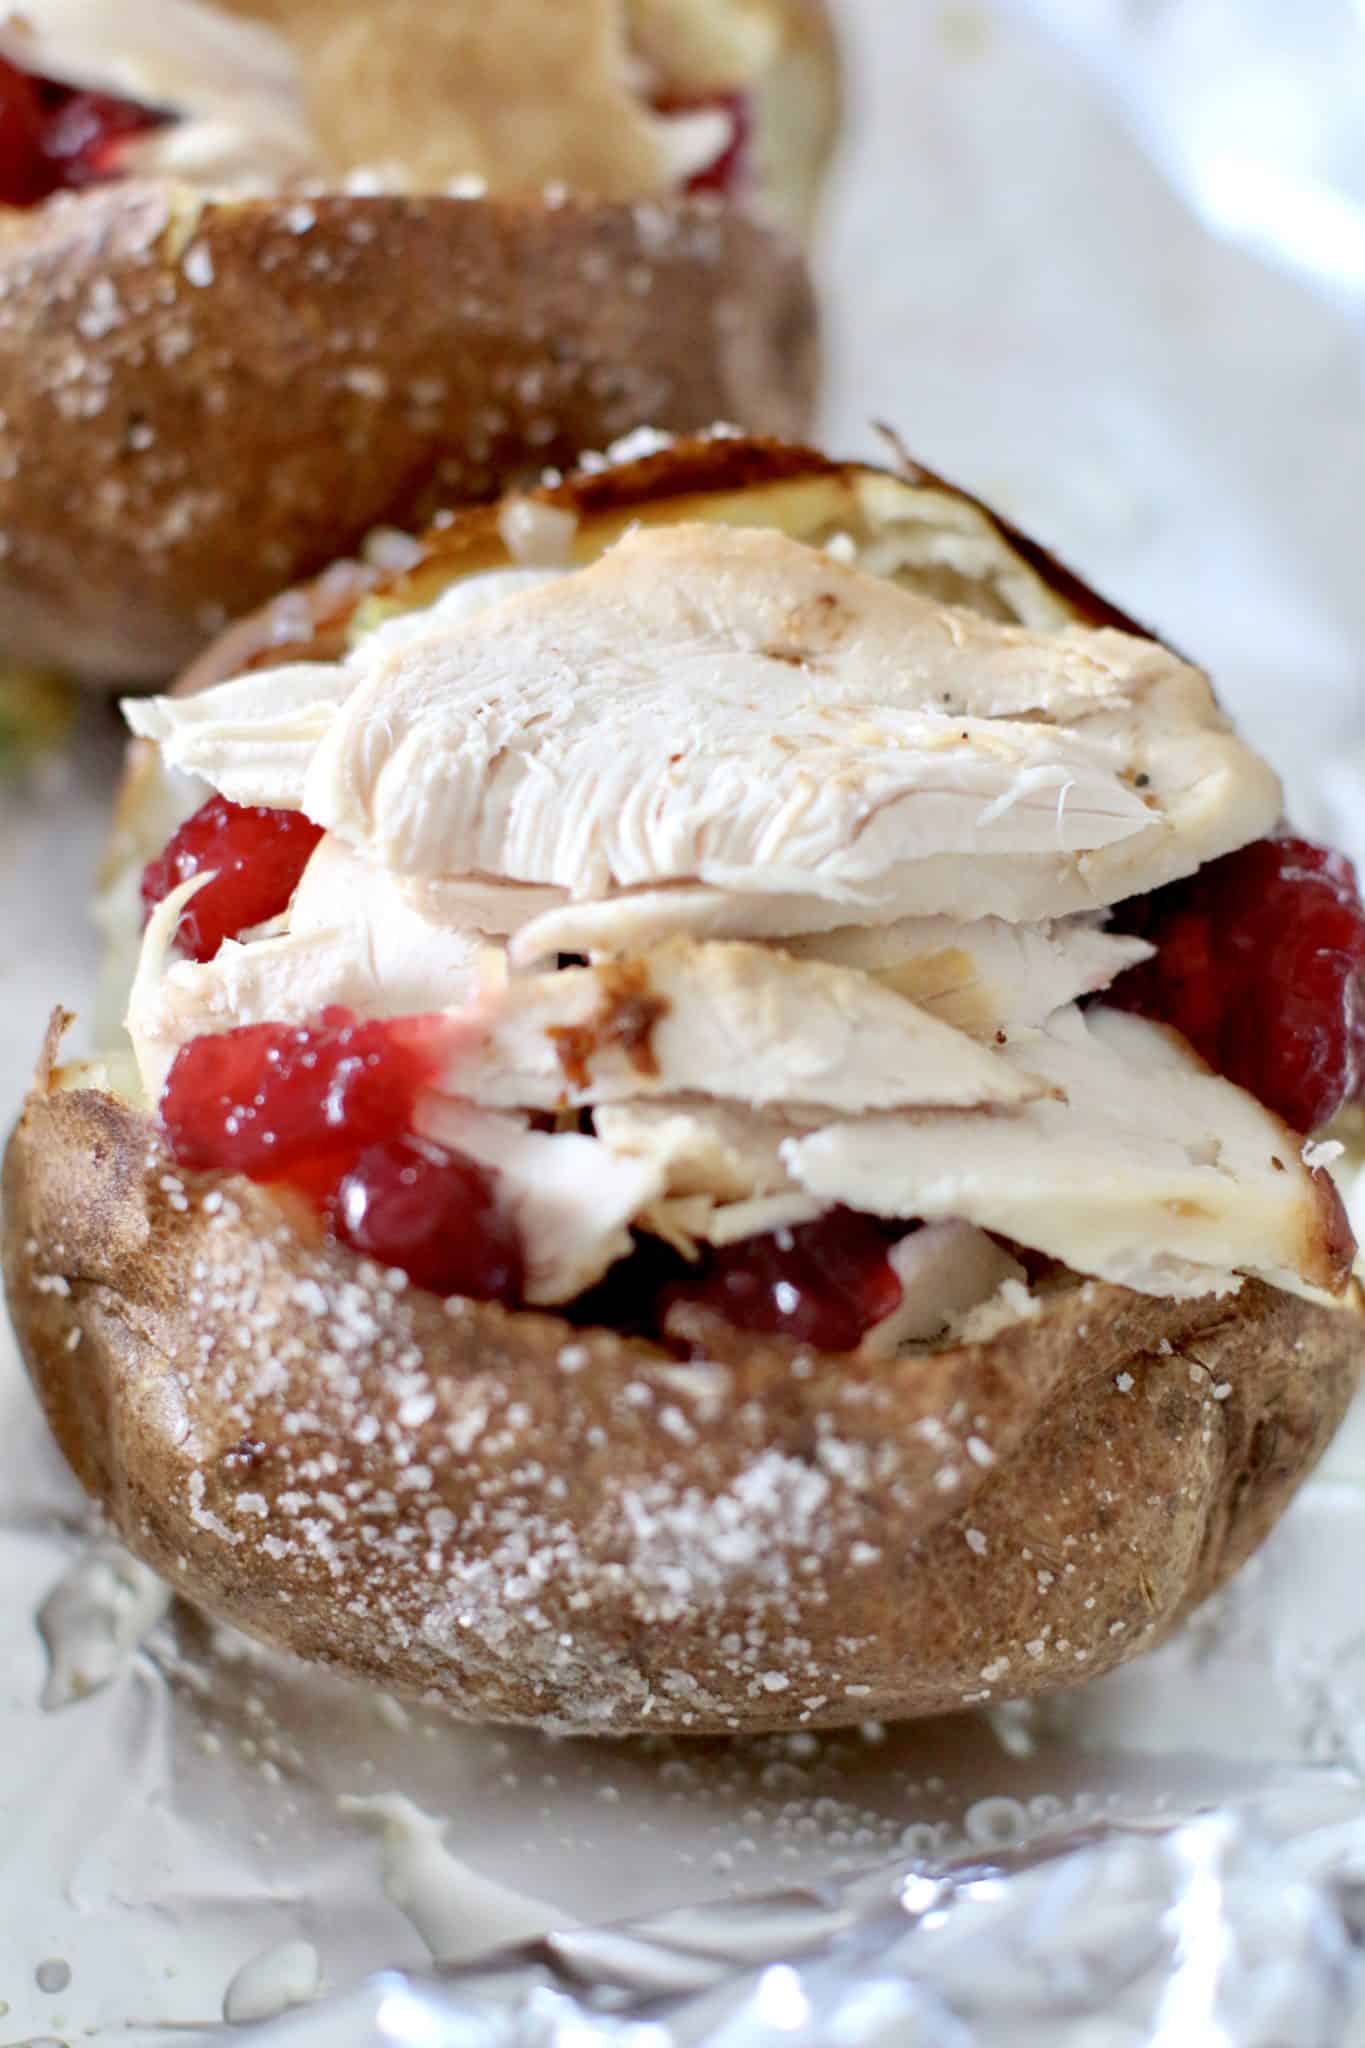 sliced turkey layered on top of cranberry sauce in sliced baked potato.